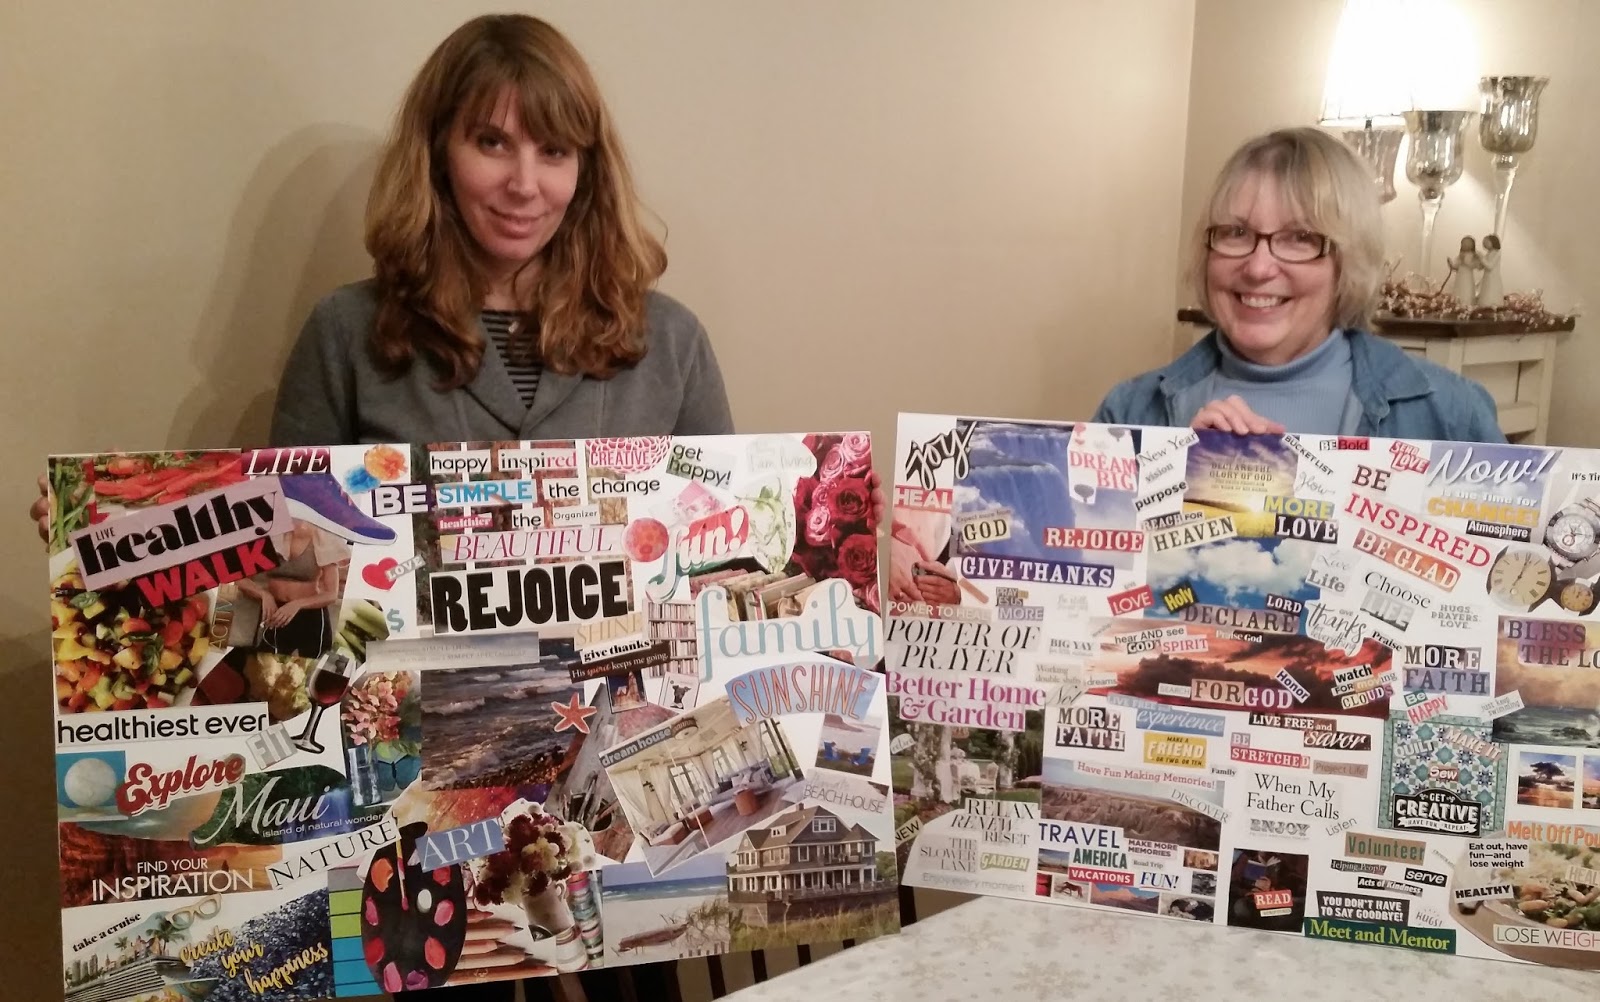 Be Creative Every Day!: How to Make a Vision Board